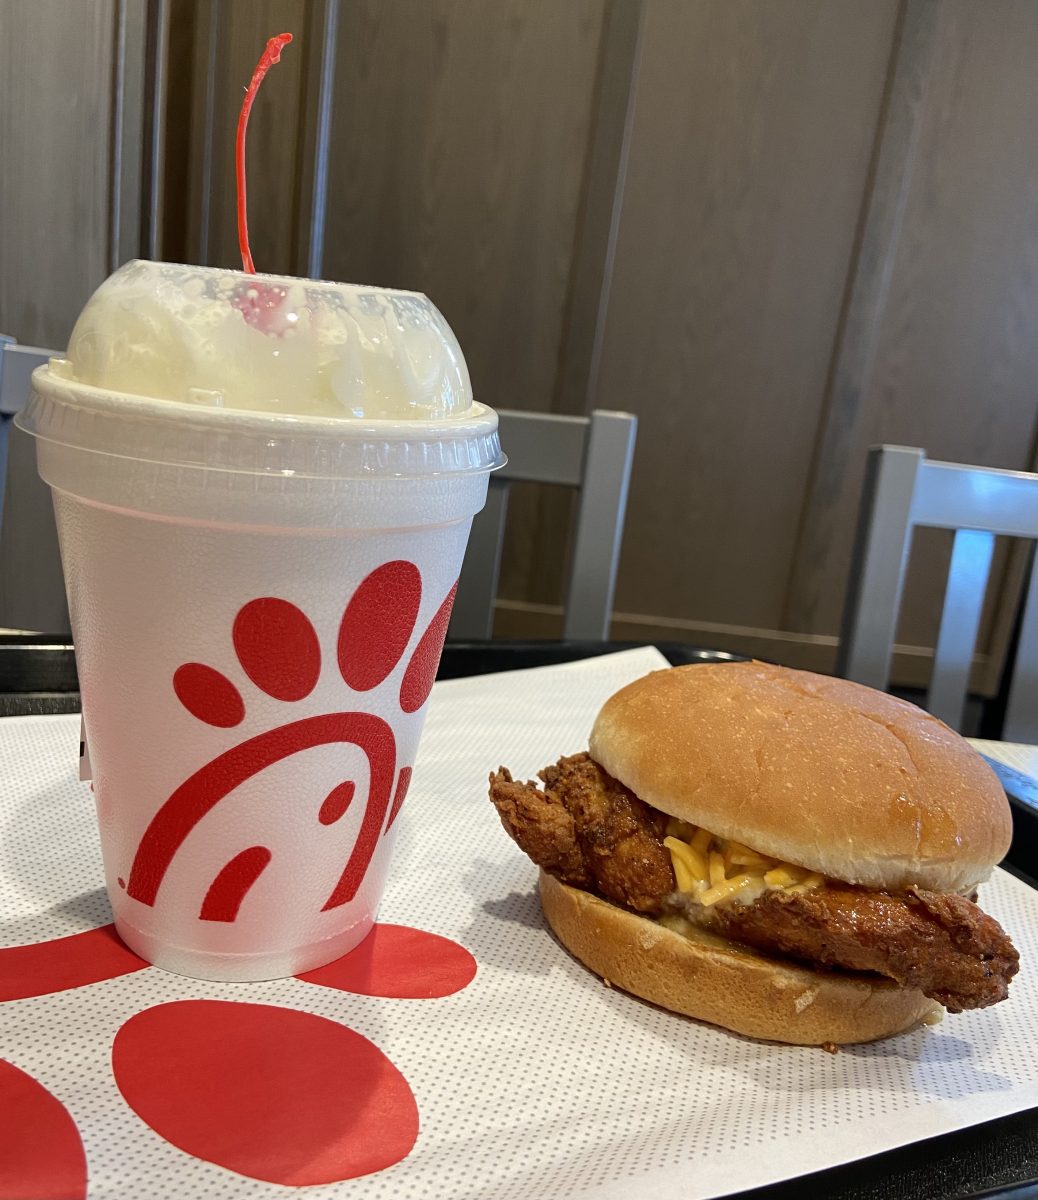 The Original Honey Pepper Pimento Chicken Sandwich next to The Caramel Crumble Milkshake. Taken at the O-Street Chick-fil-A in Lincoln during lunch time.